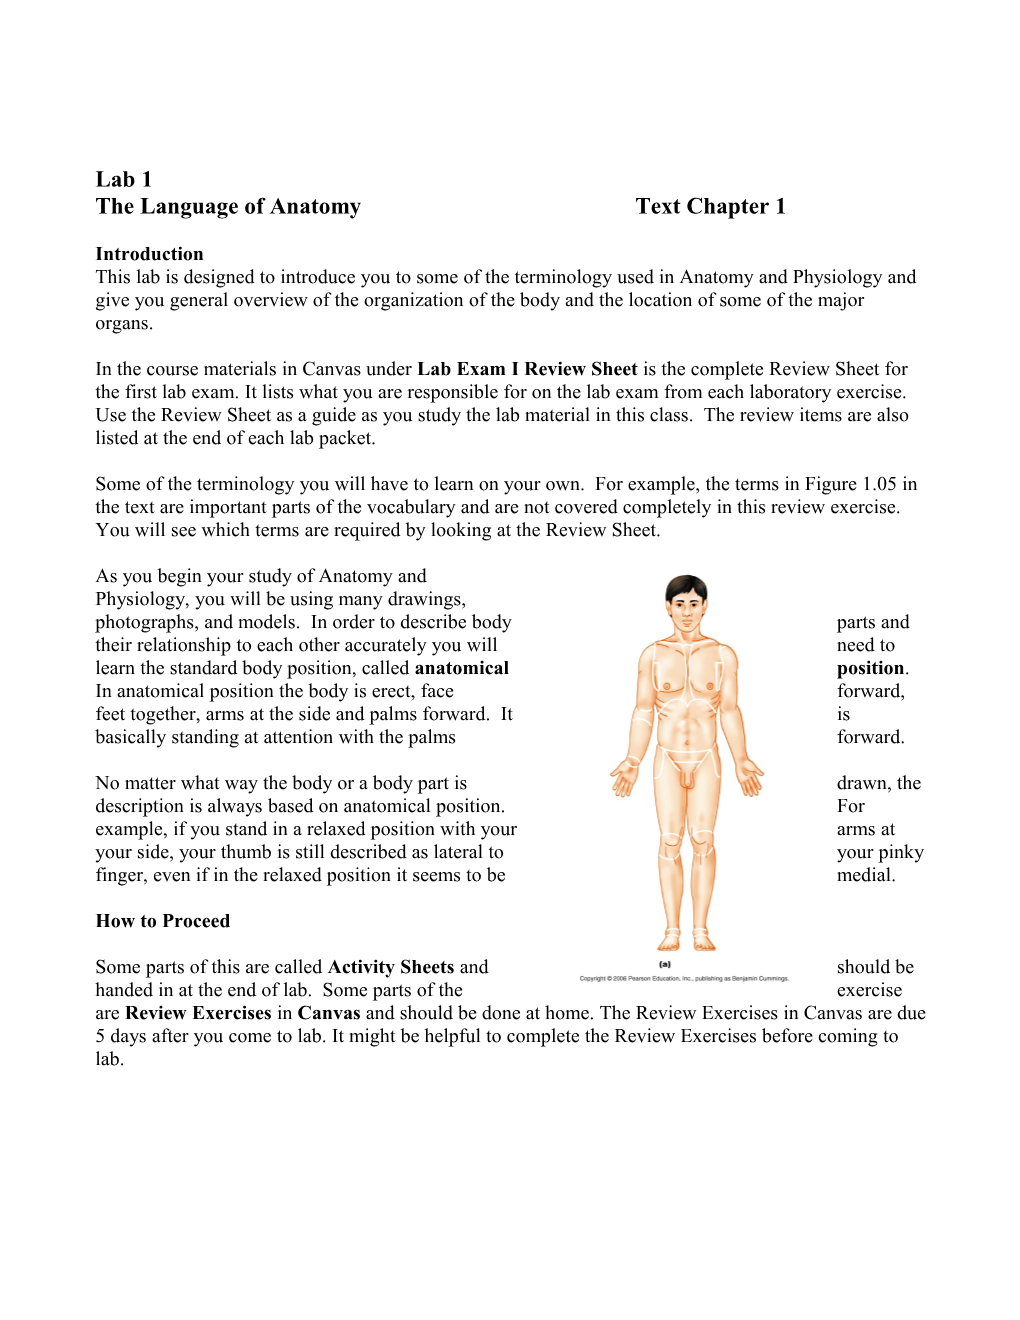 The Language of Anatomy Text Chapter 1